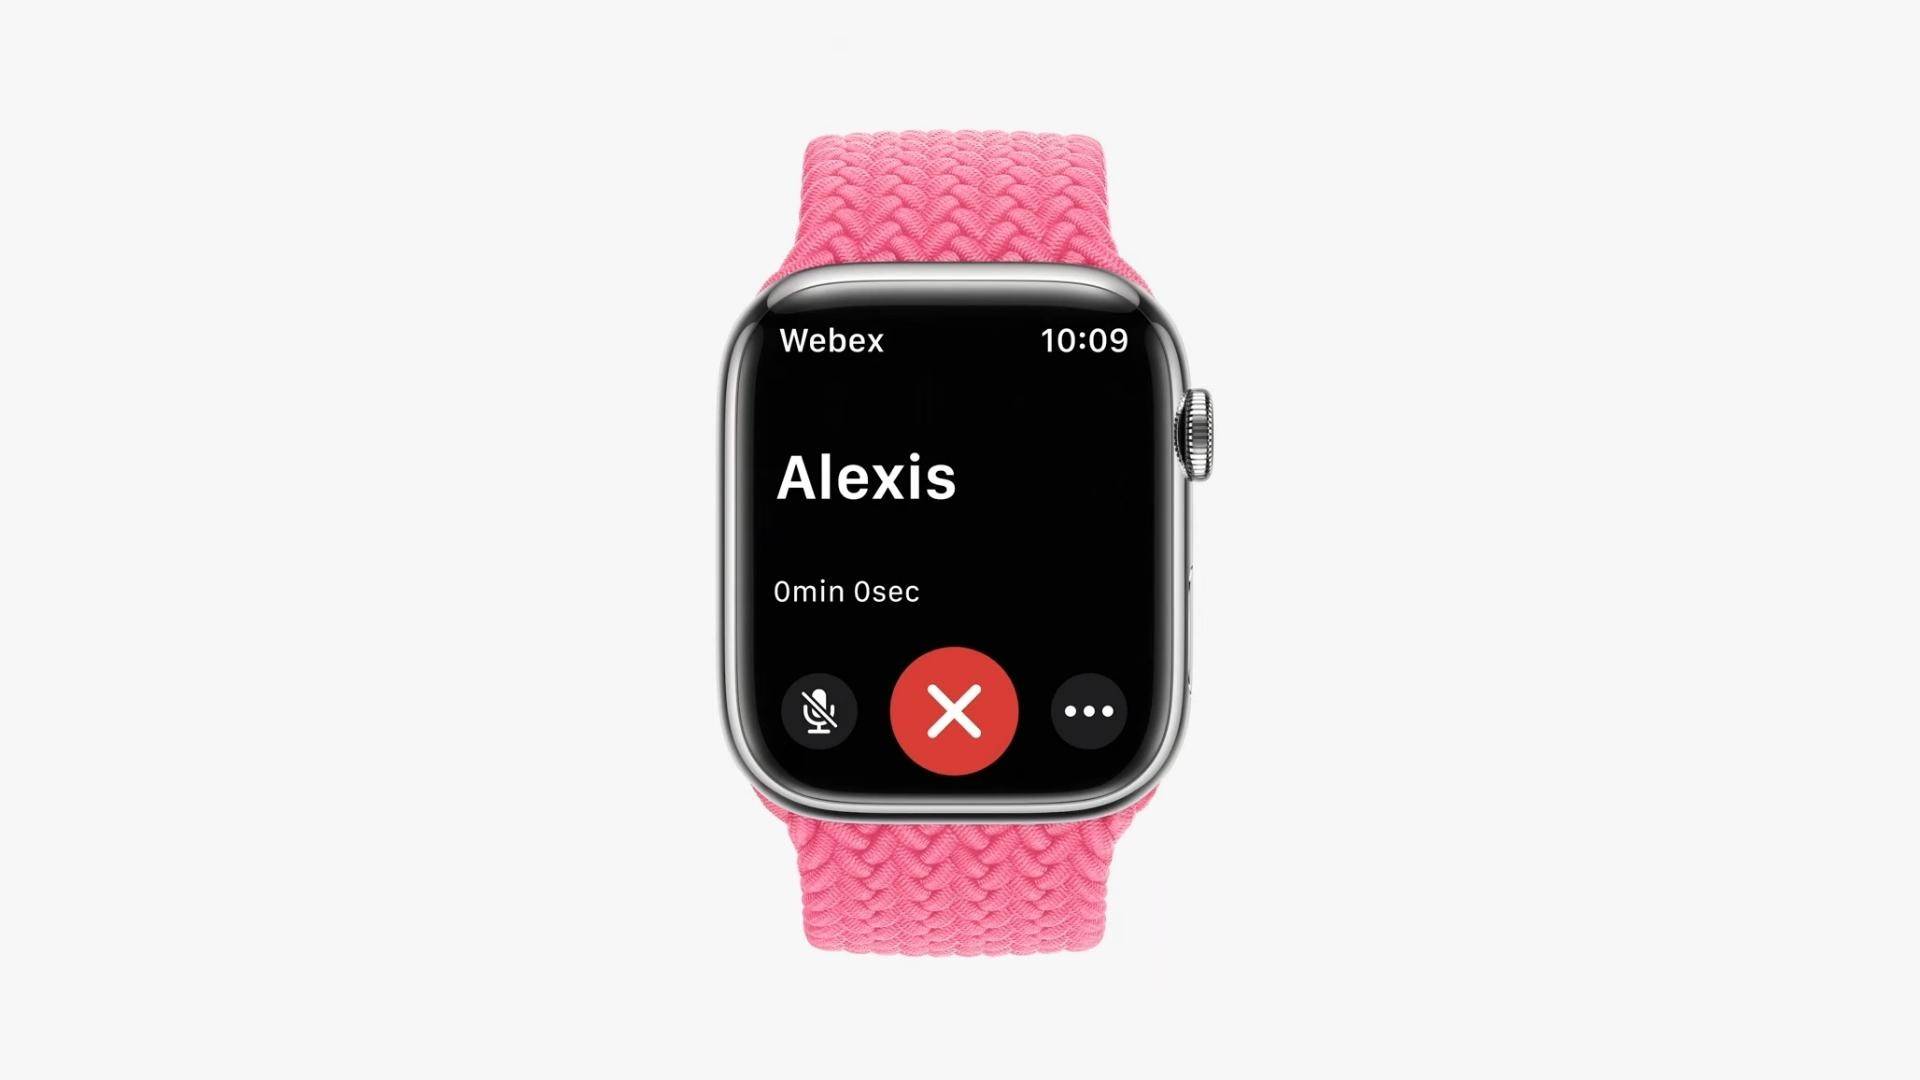 An image showing the calling screen on an Apple Watch enabled by CallKit